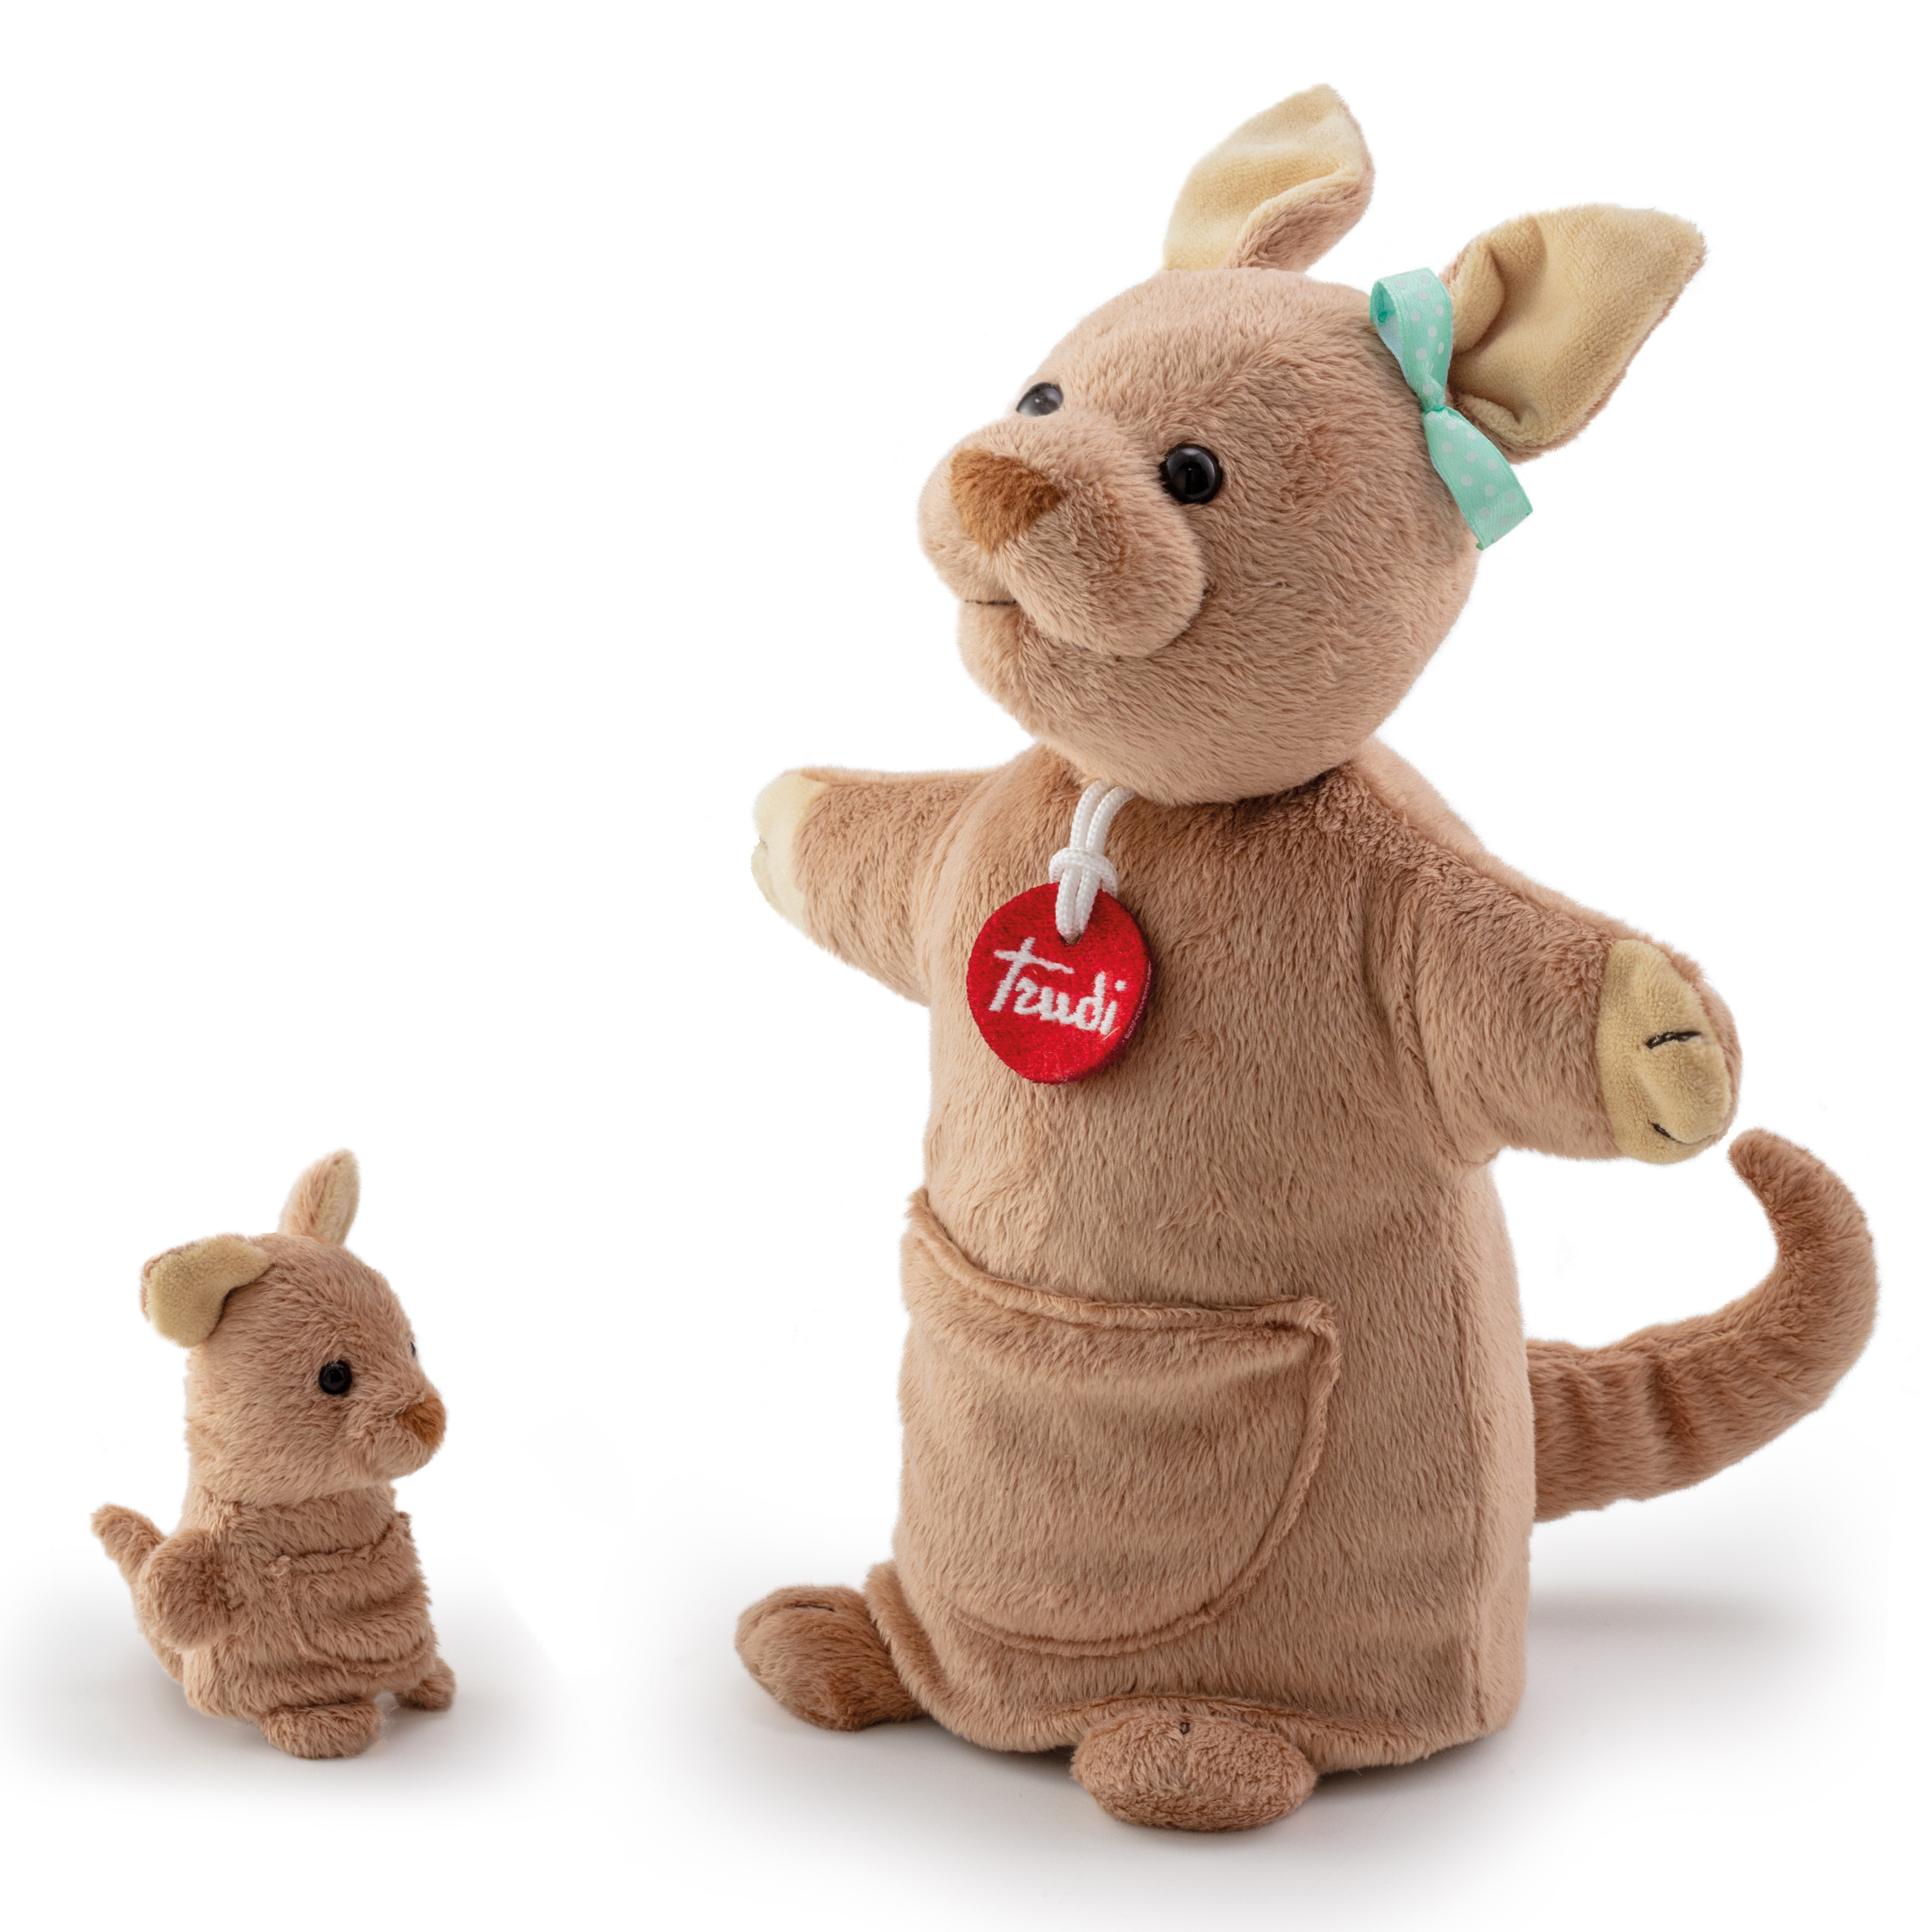 Hand puppet kangaroo with finger puppet baby by Trudi